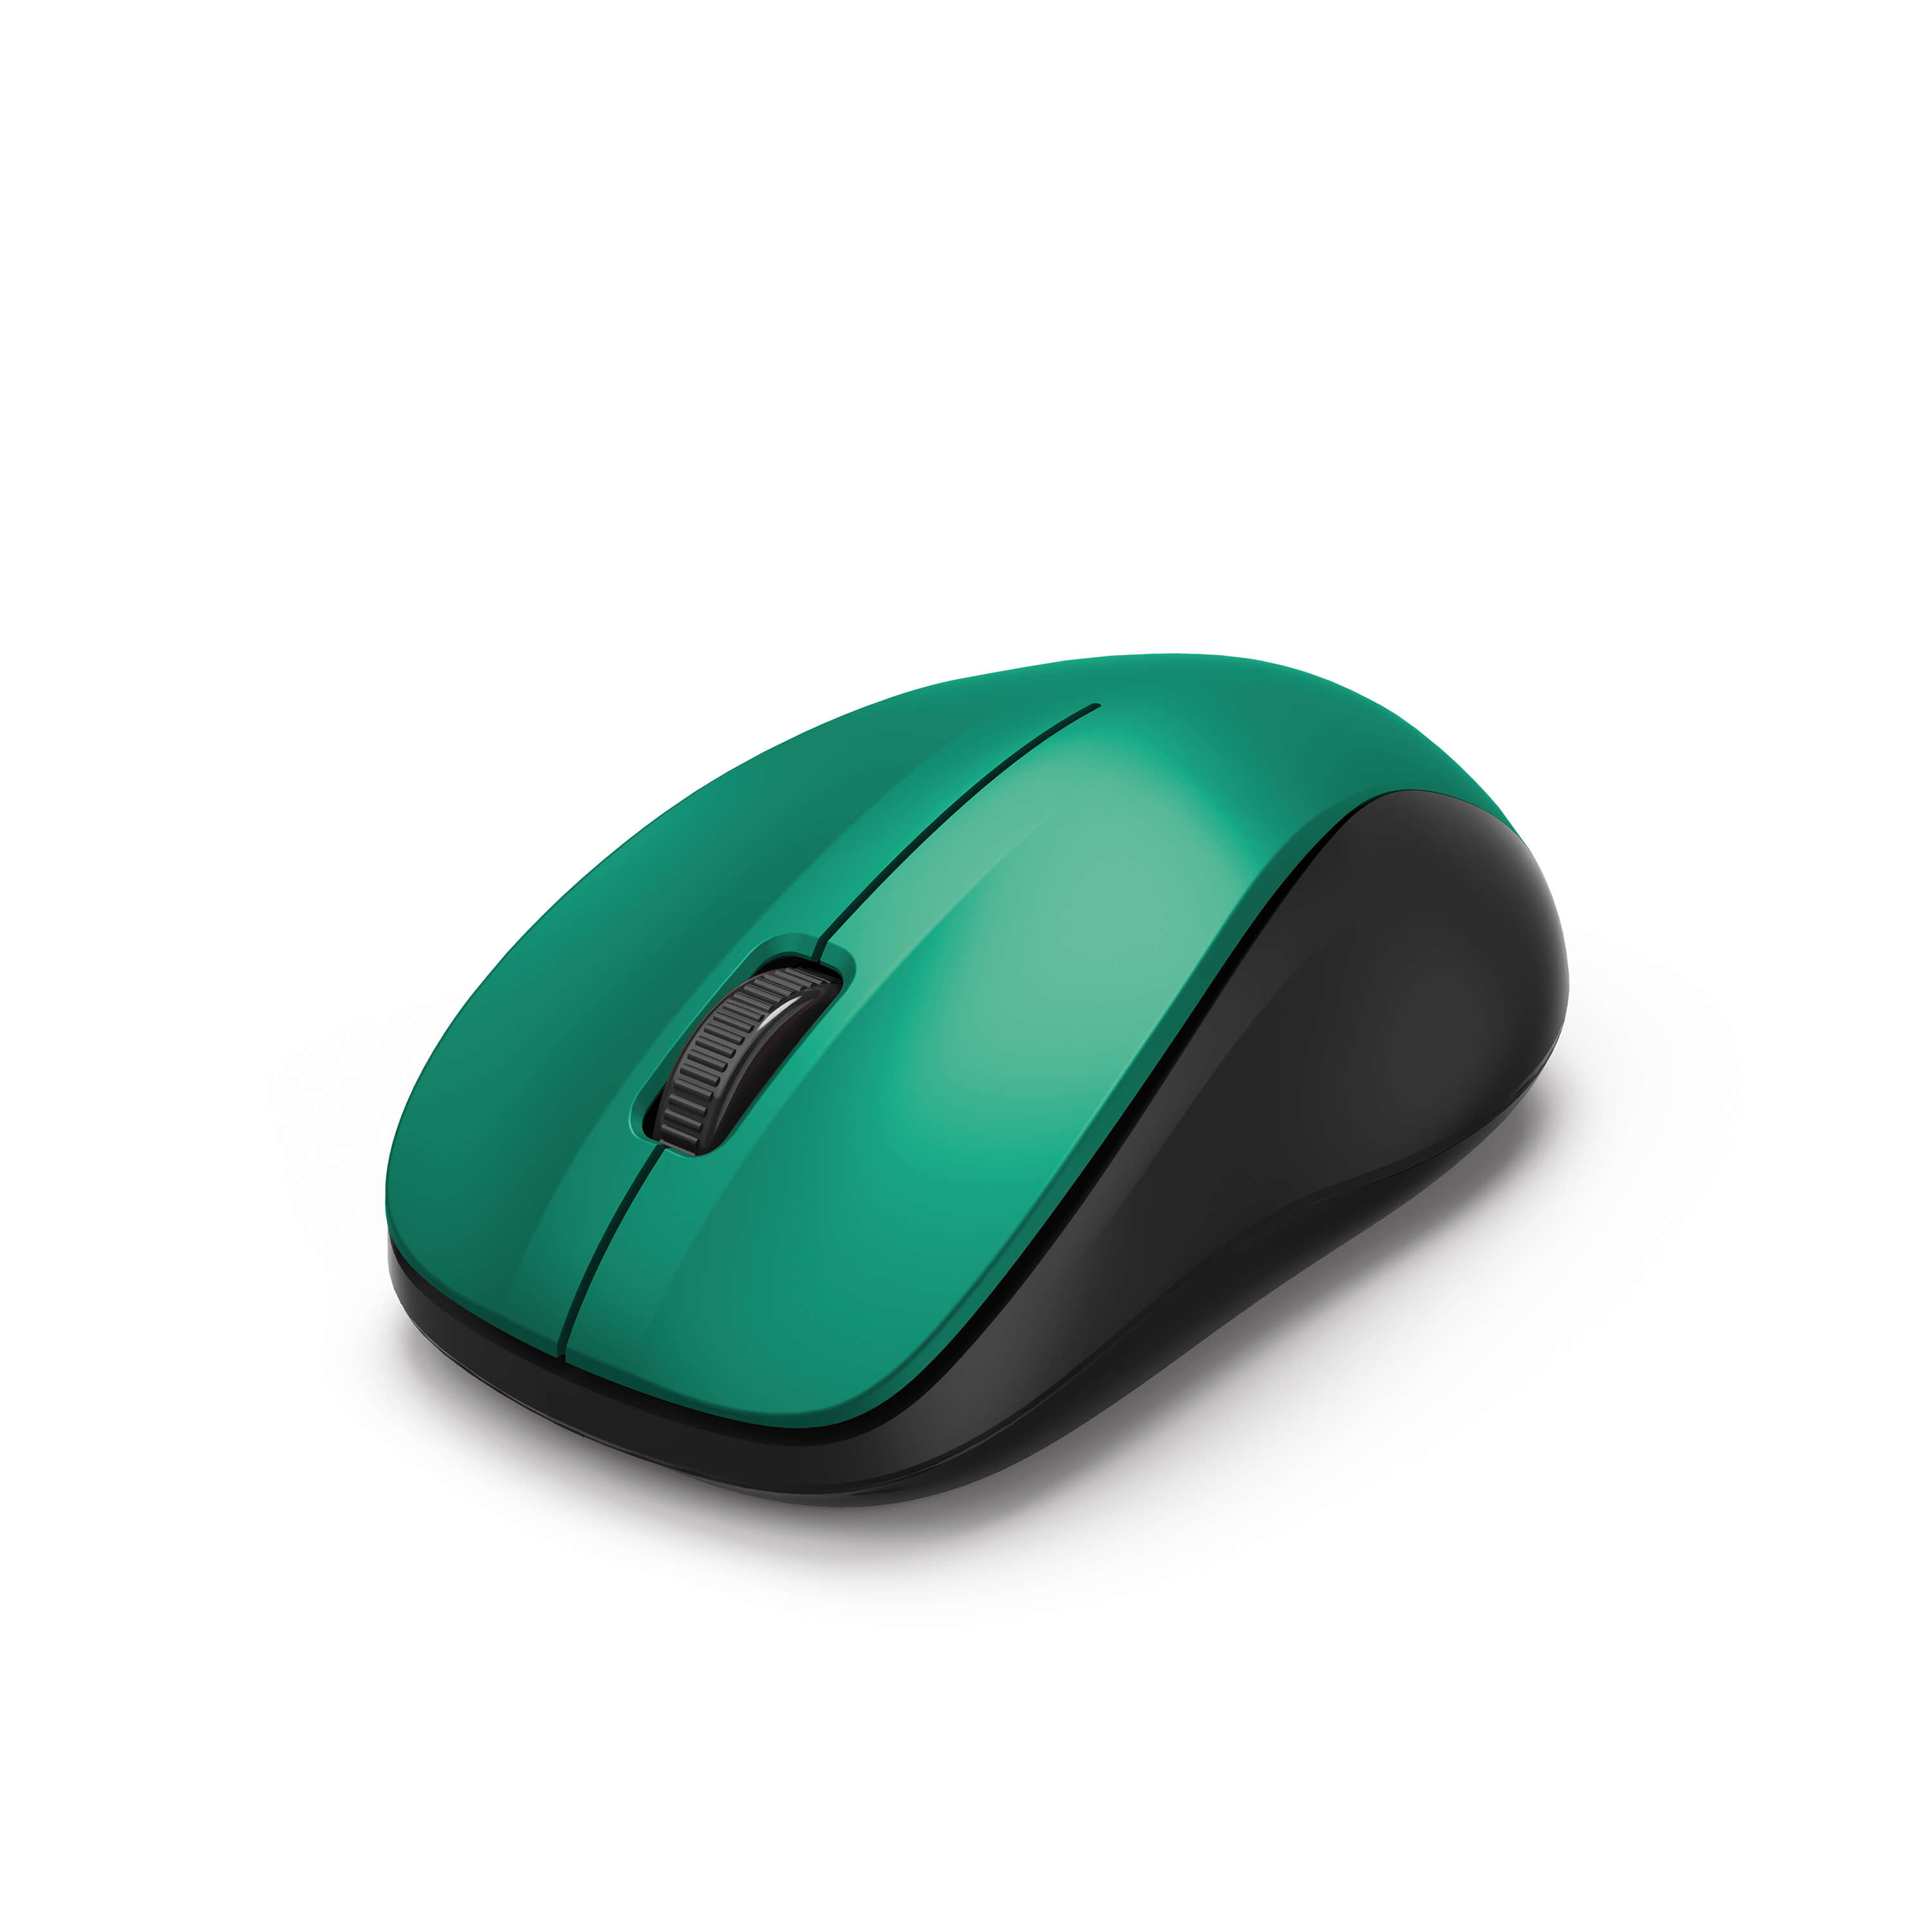 HAMA 3-Button Mouse, MW-300 Blue-Green